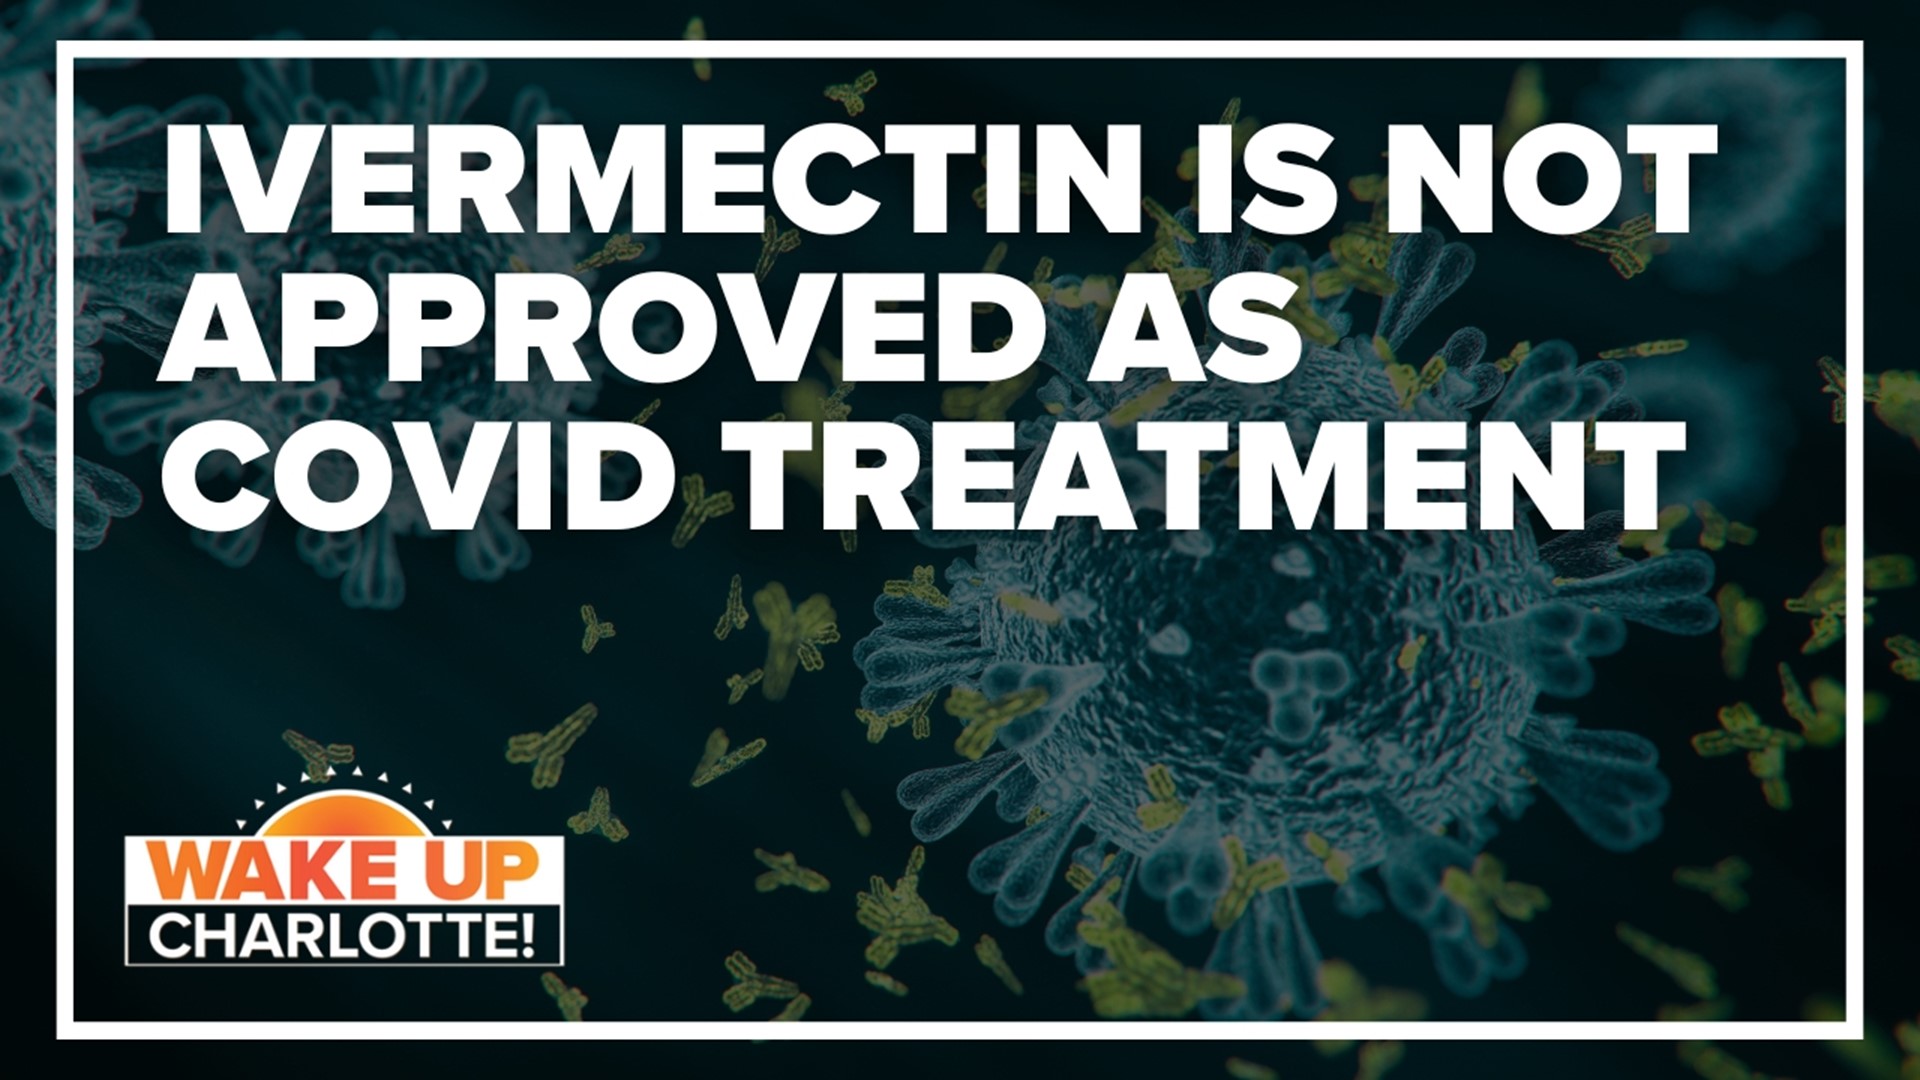 Ivermectin has been a source of controversy since the start of the pandemic, and new viral claims have put it back in the spotlight